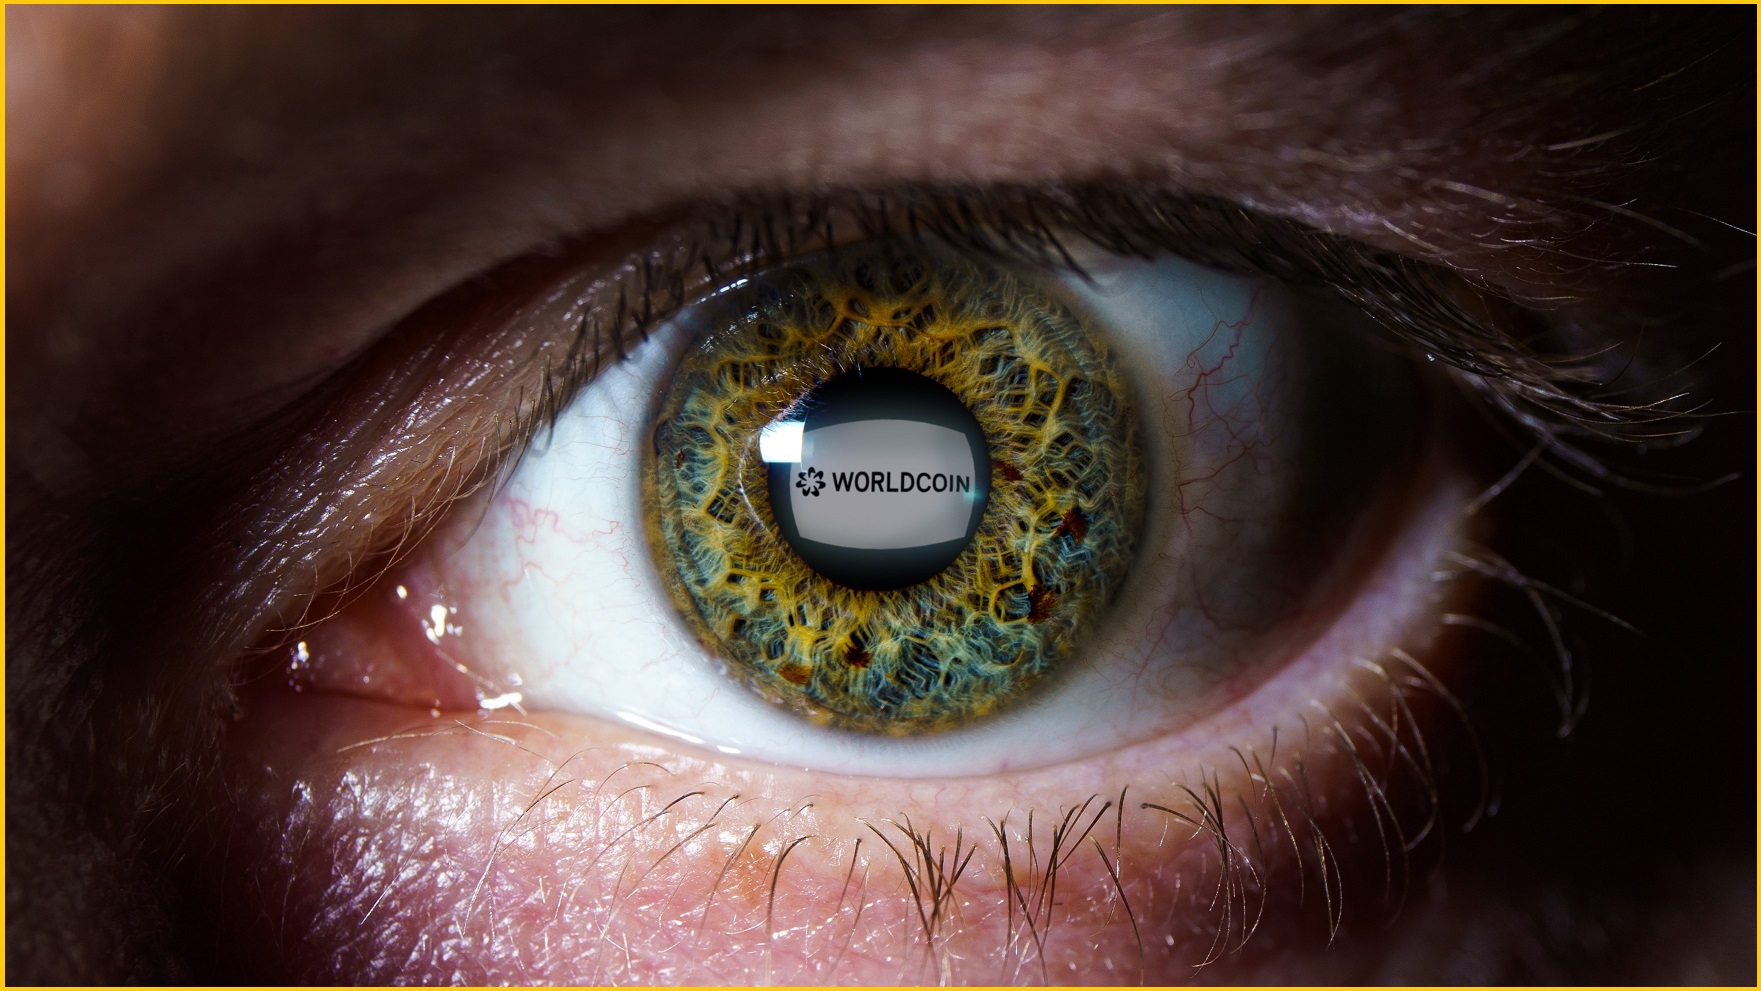 Close-up of a person's eye with the Worldcoin logo in the pupil.